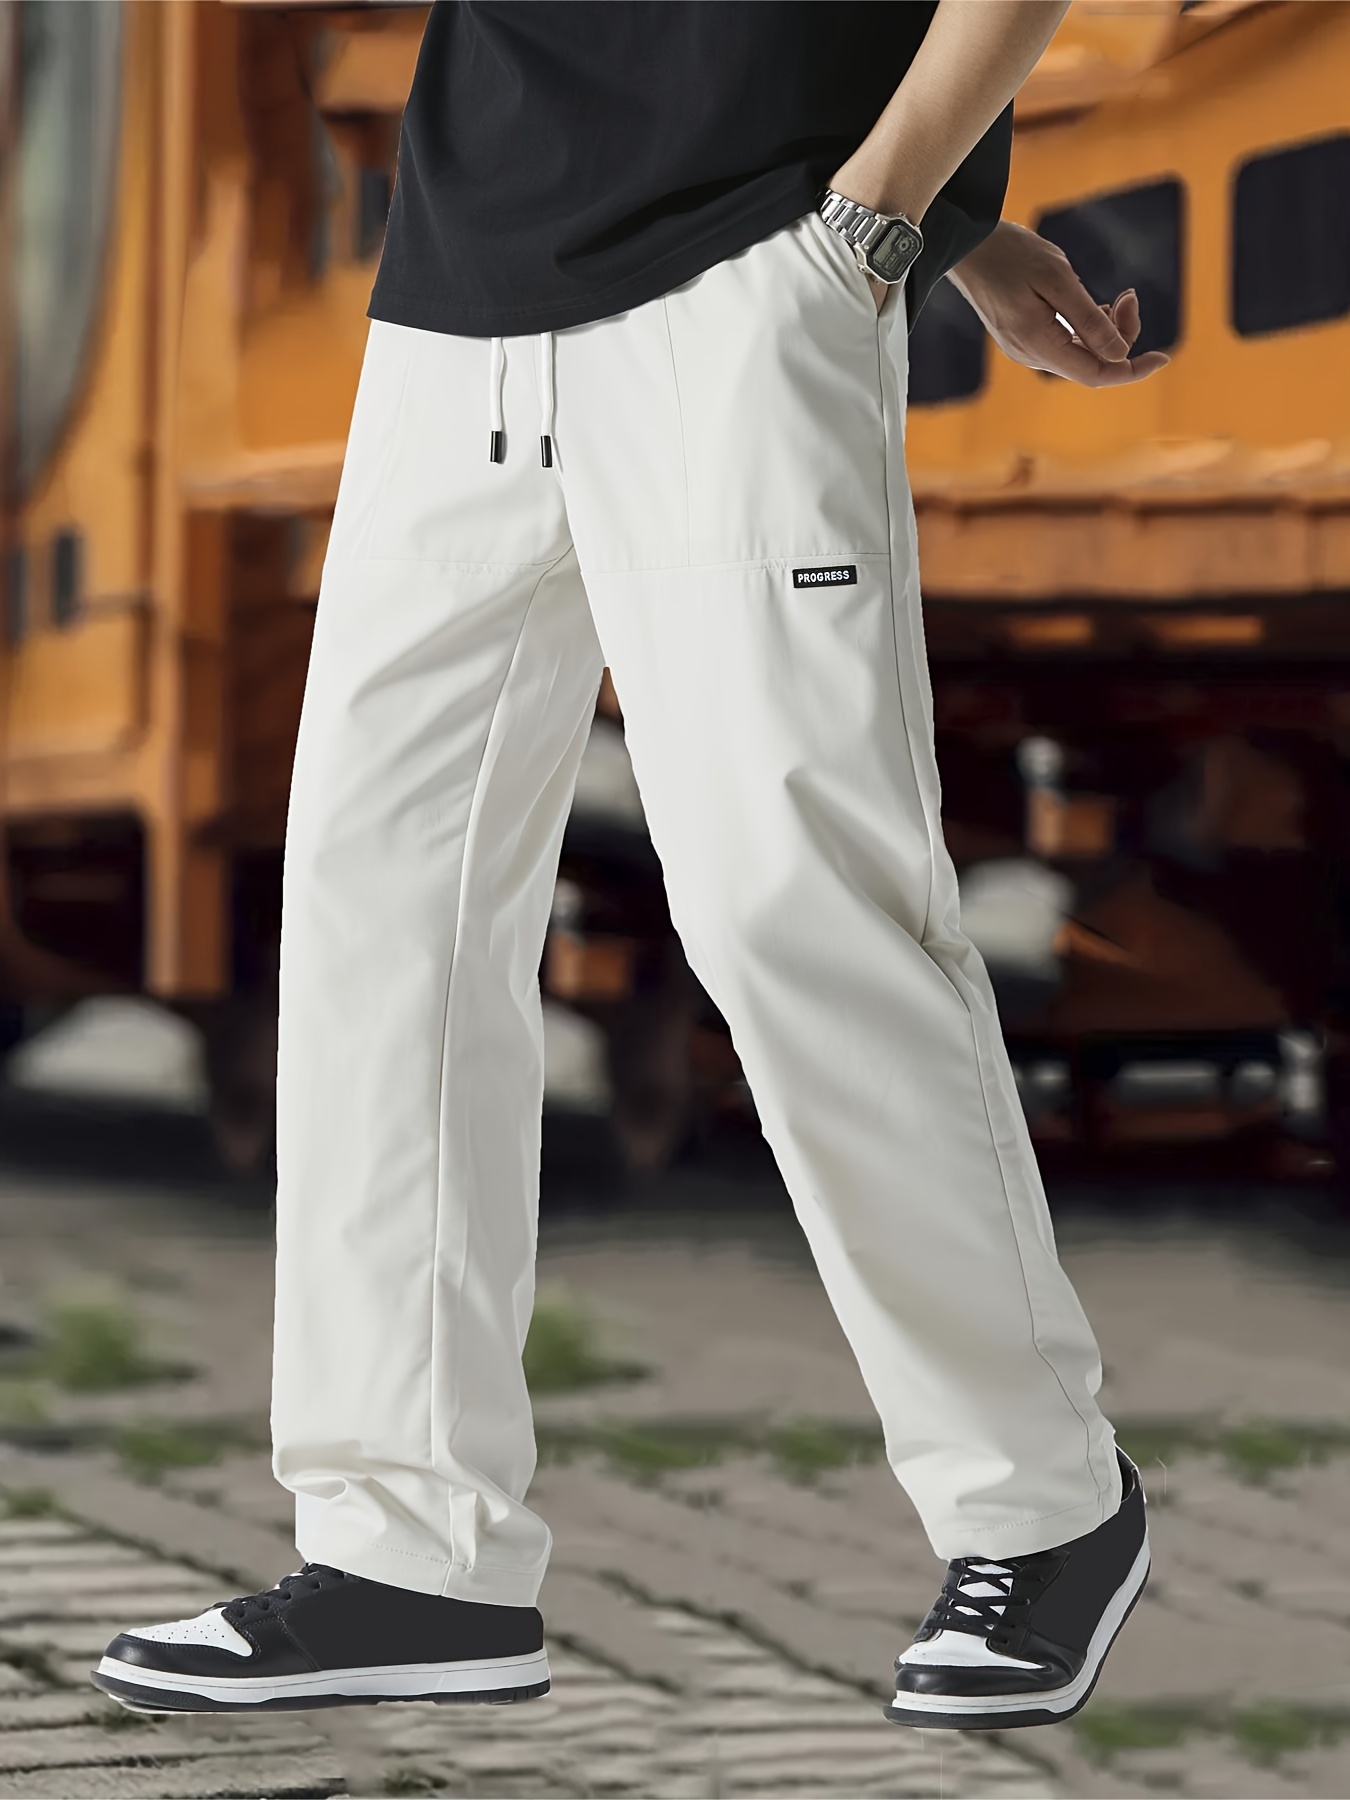 Men's Business Casual Pants Straight Leg Slim Stretch Trousers